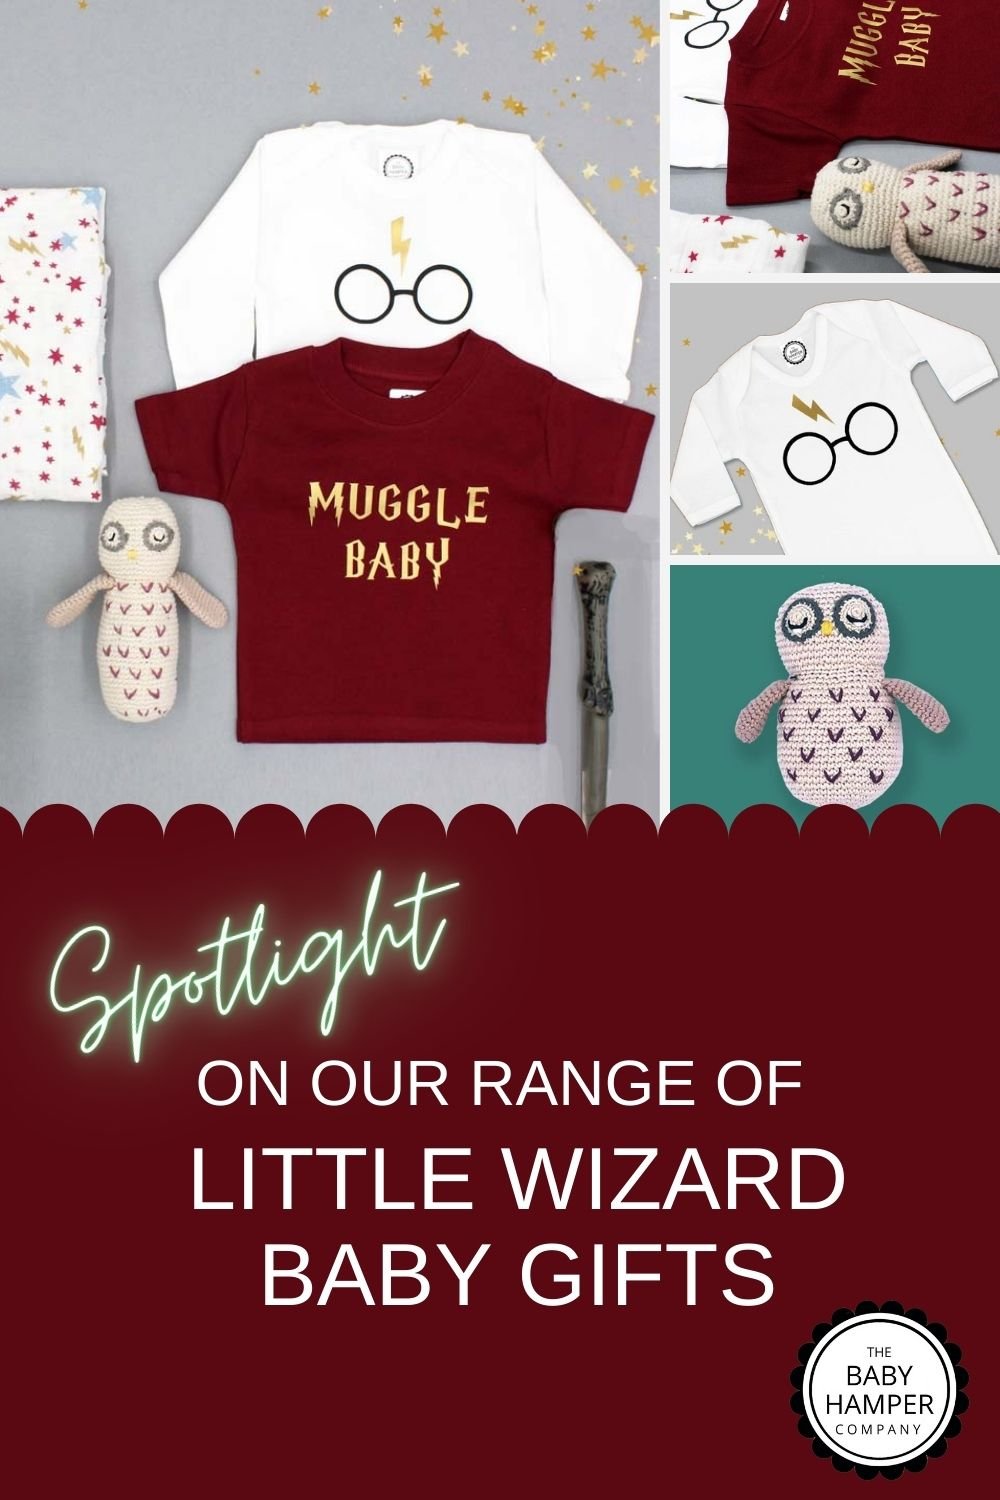 Spotlight on or Range of Little Wizard Baby Gifts